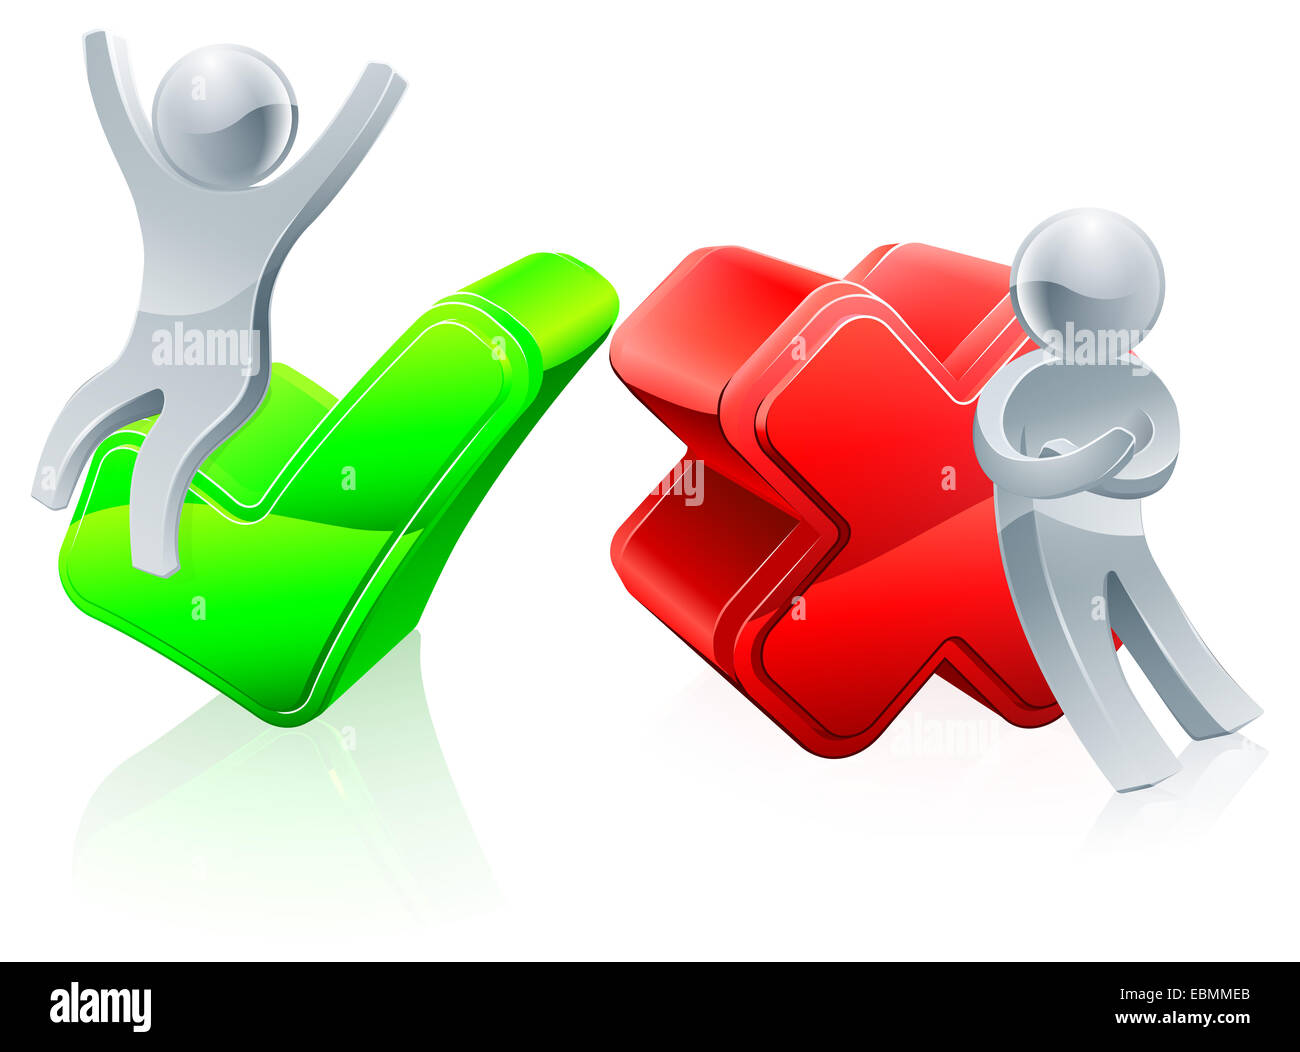 Green tick and red cross concept with people mascots Stock Photo